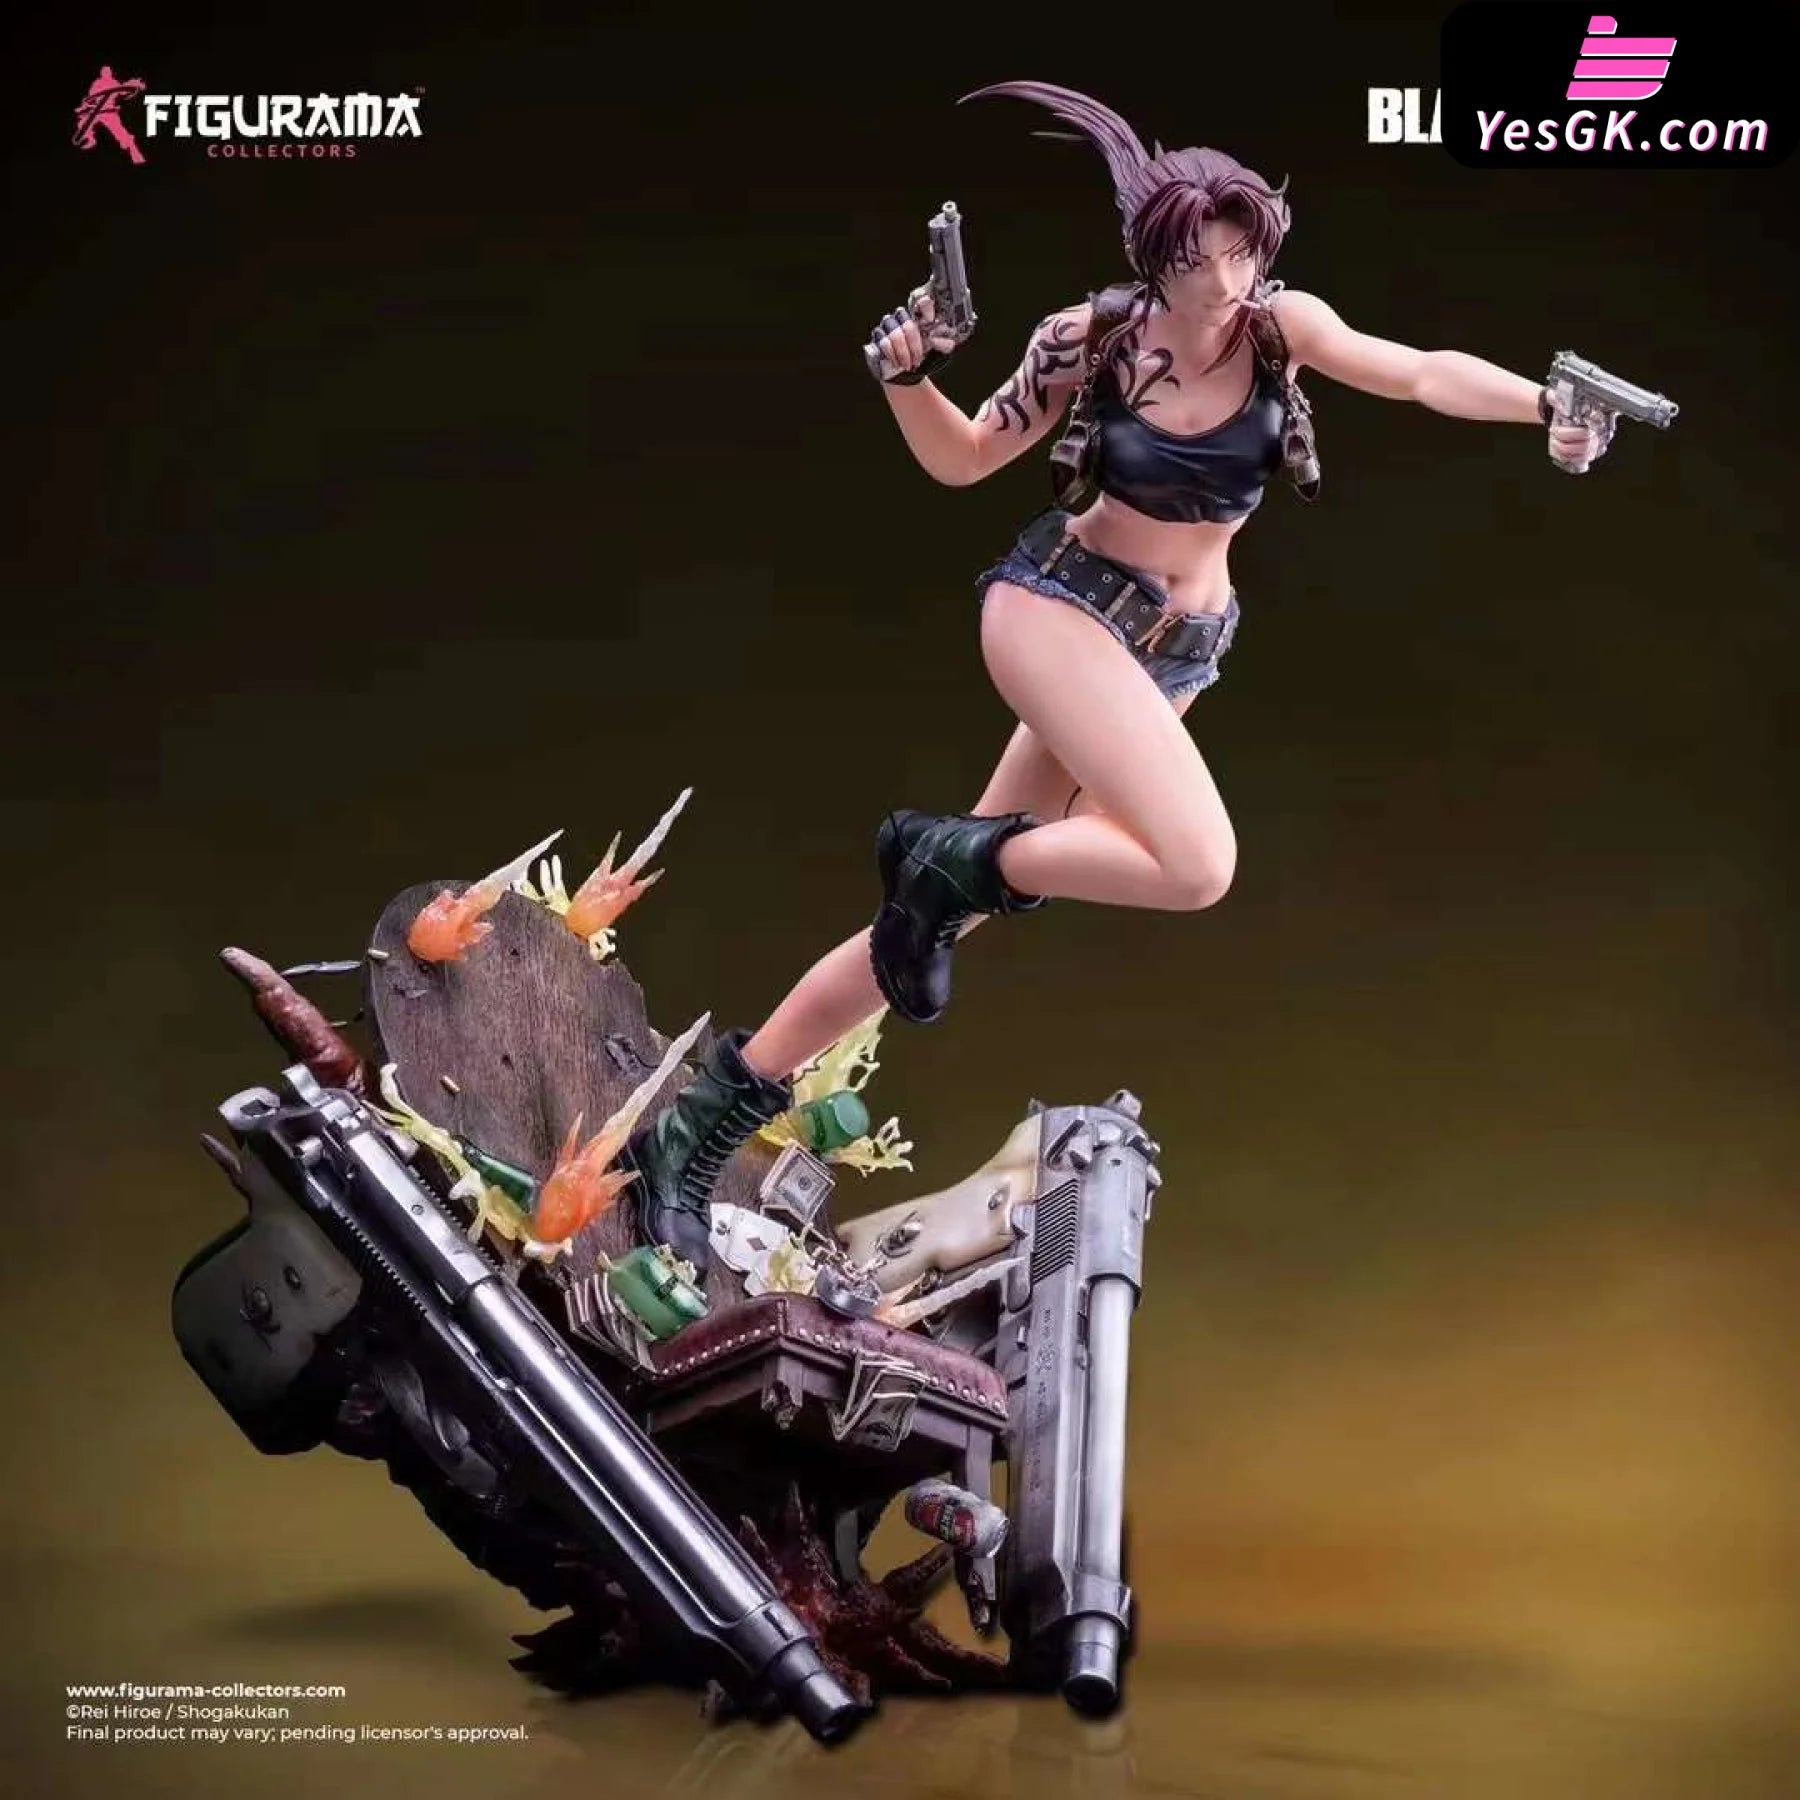 Black Lagoon Two Gunners Revy (Licensed) Resin Statue - Figurama Collectors Studio [Pre-Order] Other